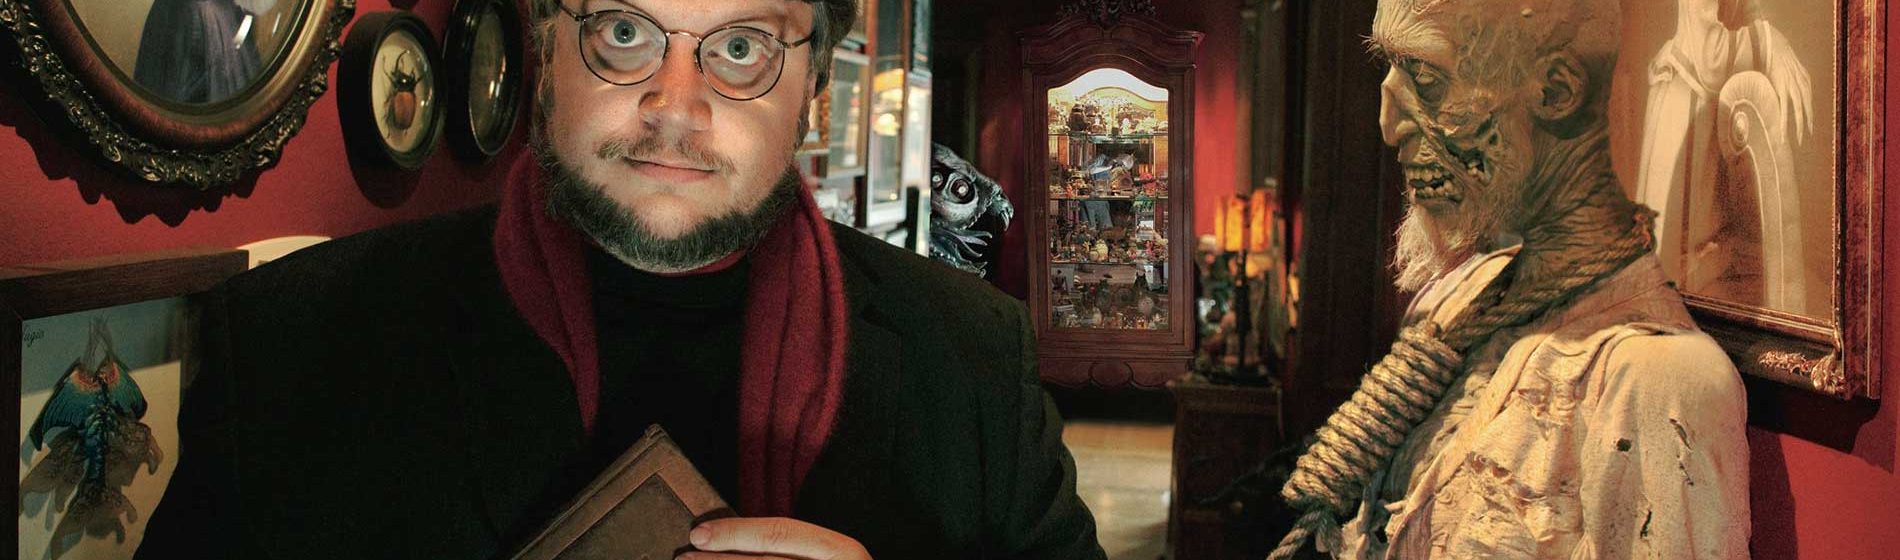 Guillermo del Toro: At Home with Monsters Exhibition Toronto